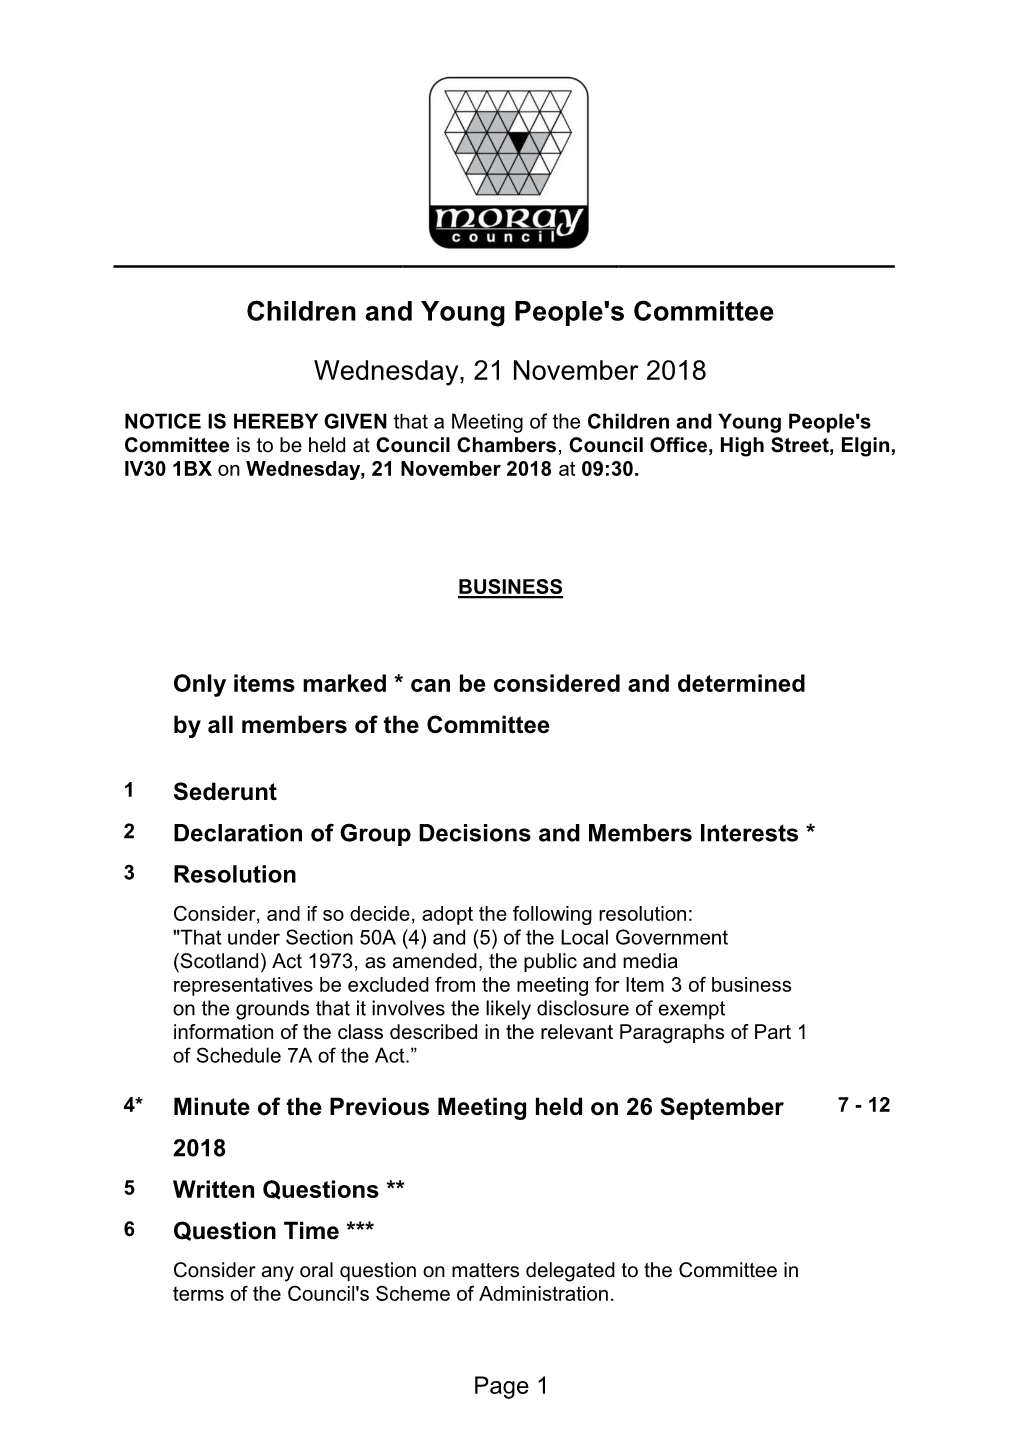 Children and Young People's Committee Wednesday, 21